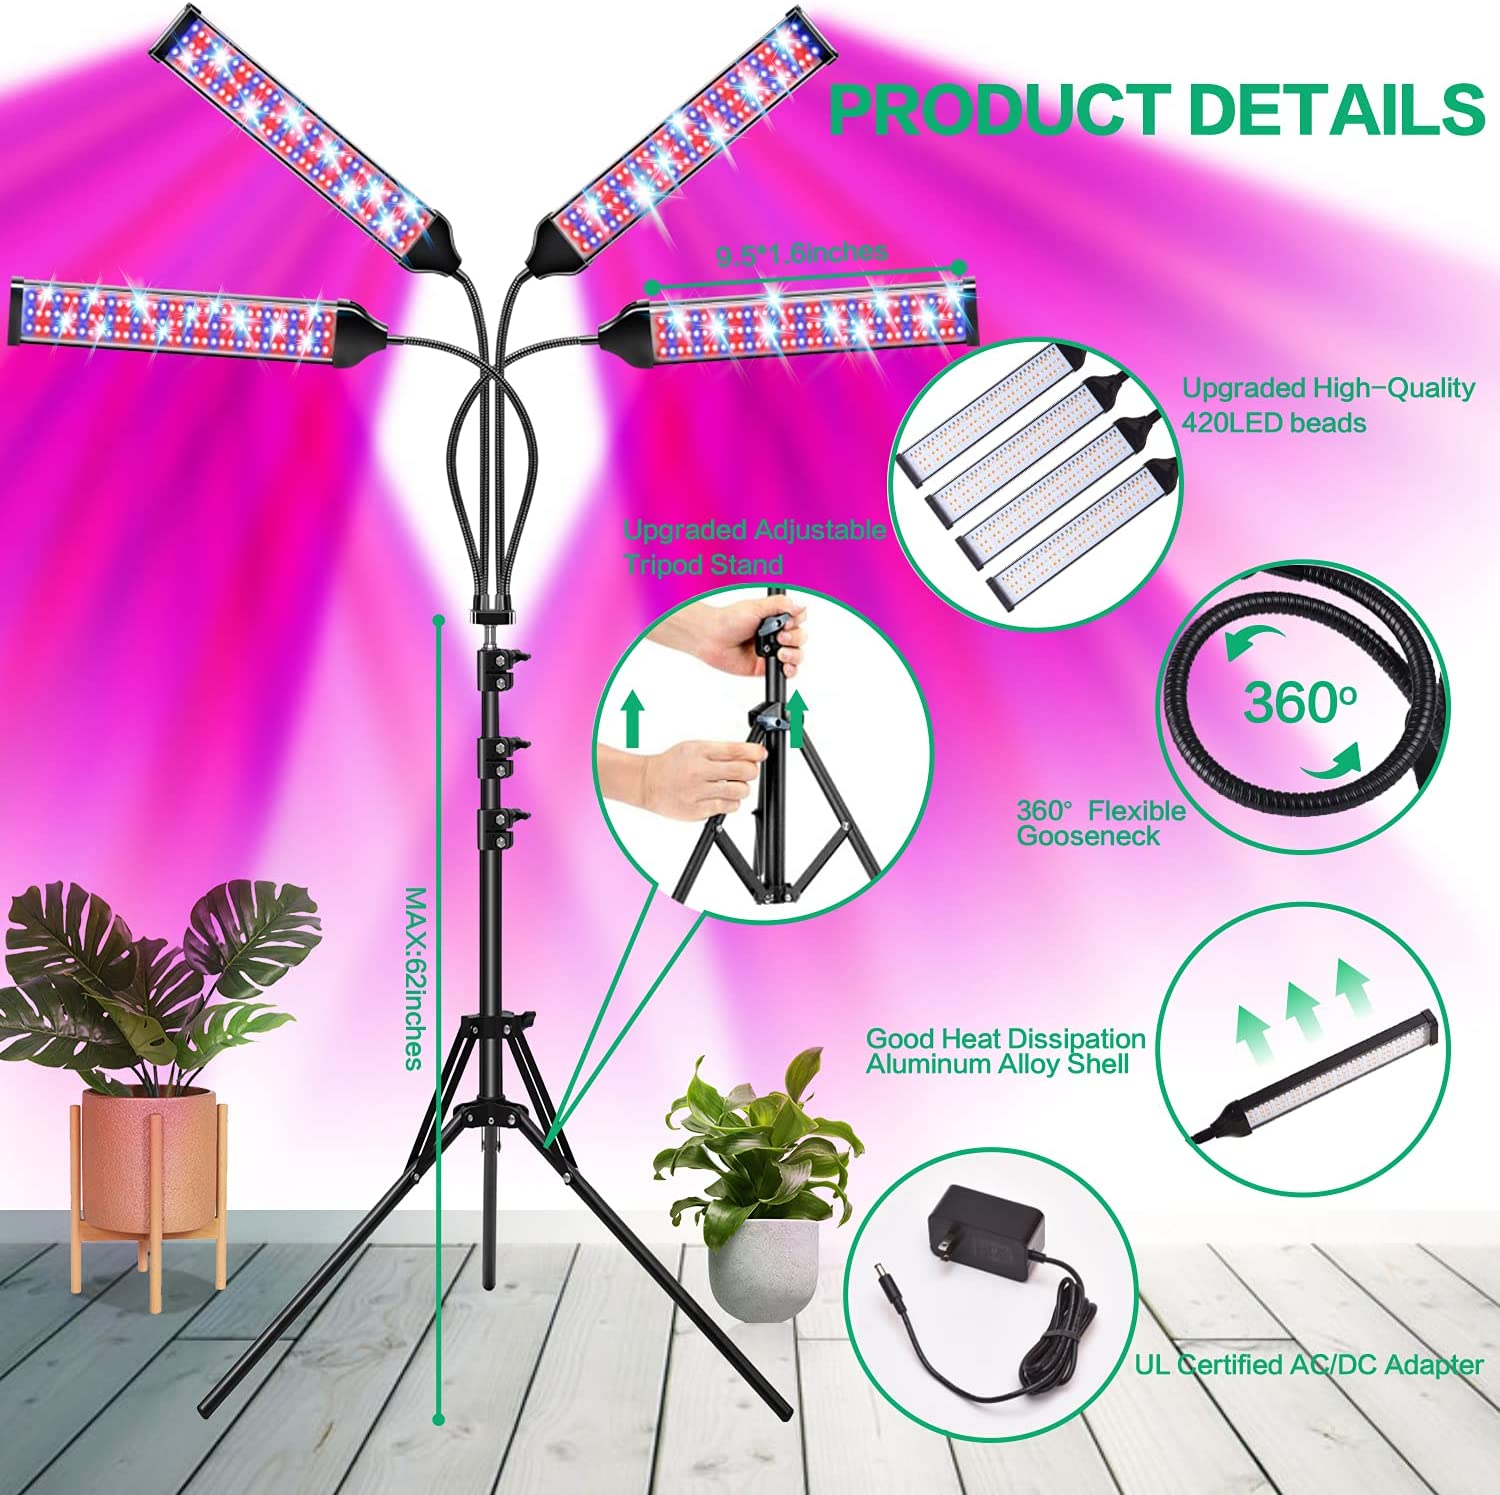 Auto On/Off & 9 Dimmable Levels for Seedling/Rooting/Blooming Grow Light for Indoor Plants Craftersmark LED Floor Plant Light Timer Full Spectrum Grow Light with Stand 